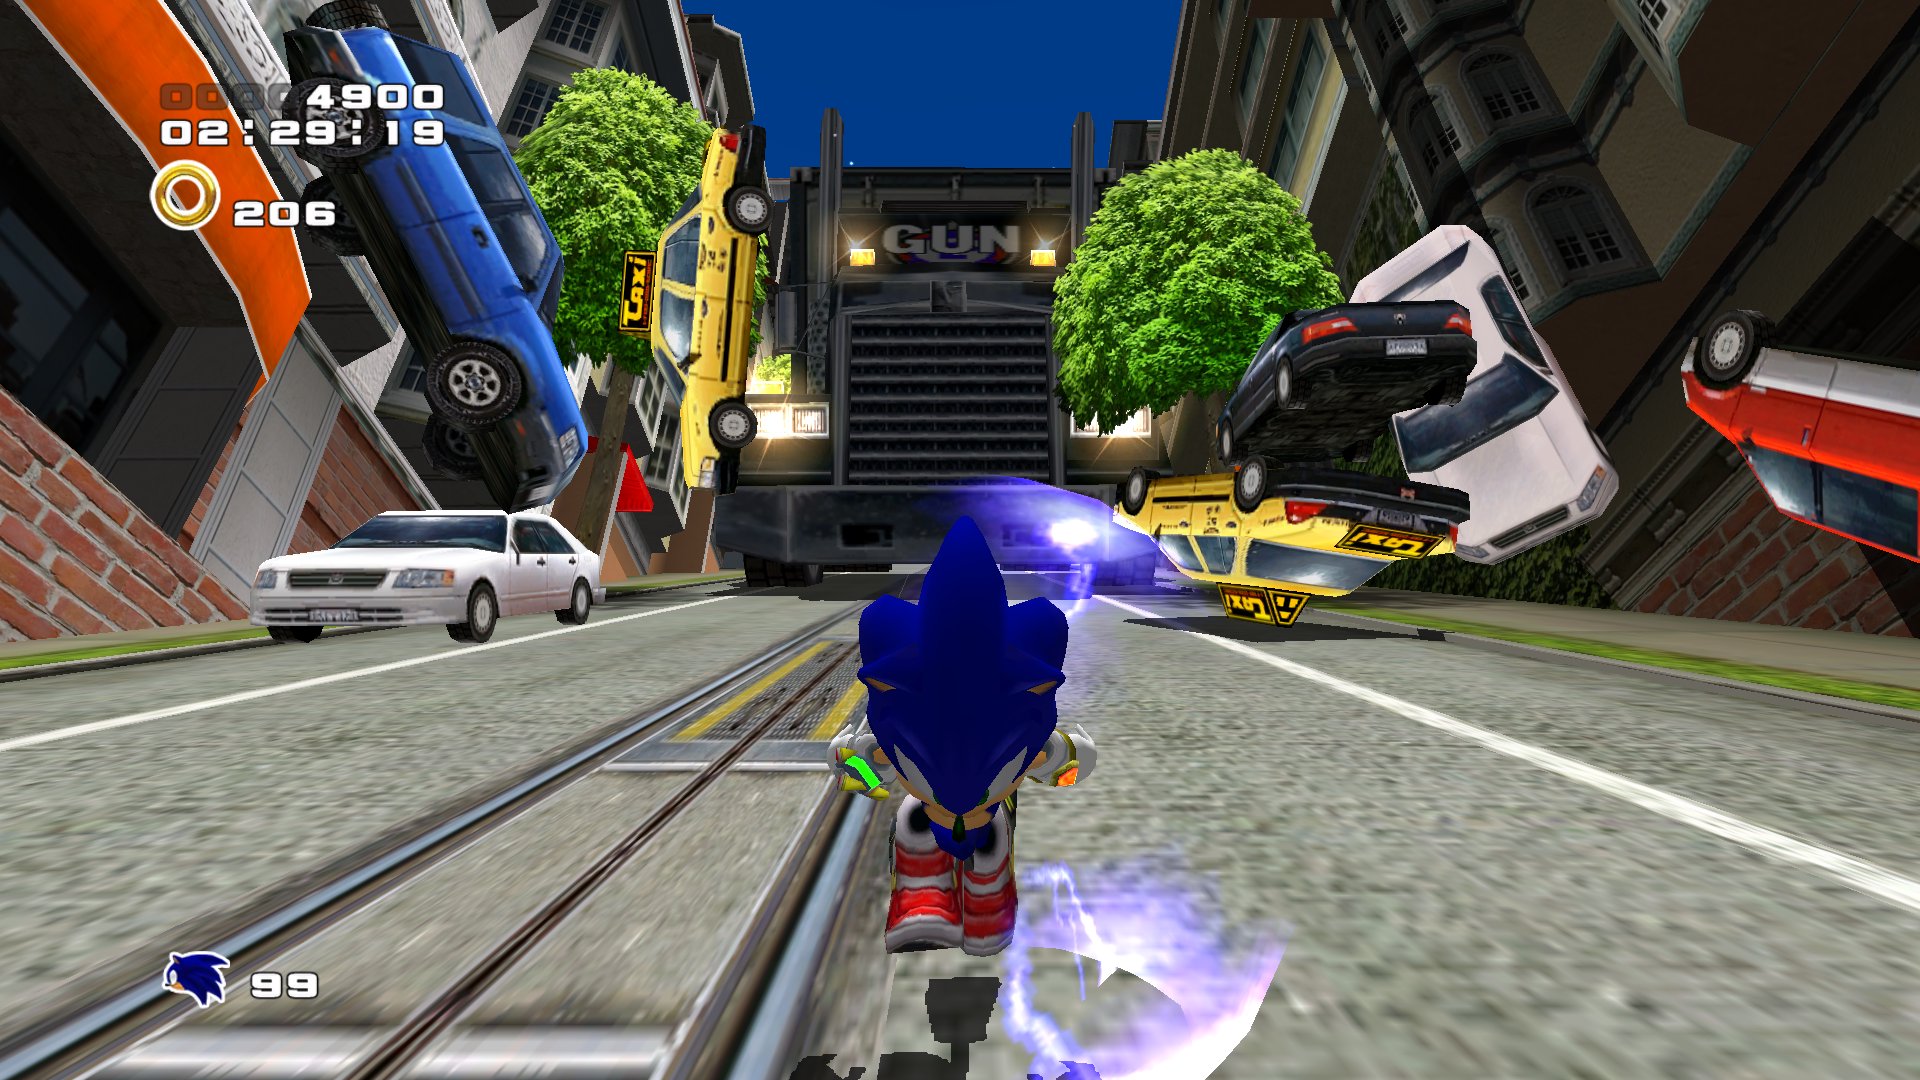 Sega says it's targeting high review scores for Sonic Frontiers